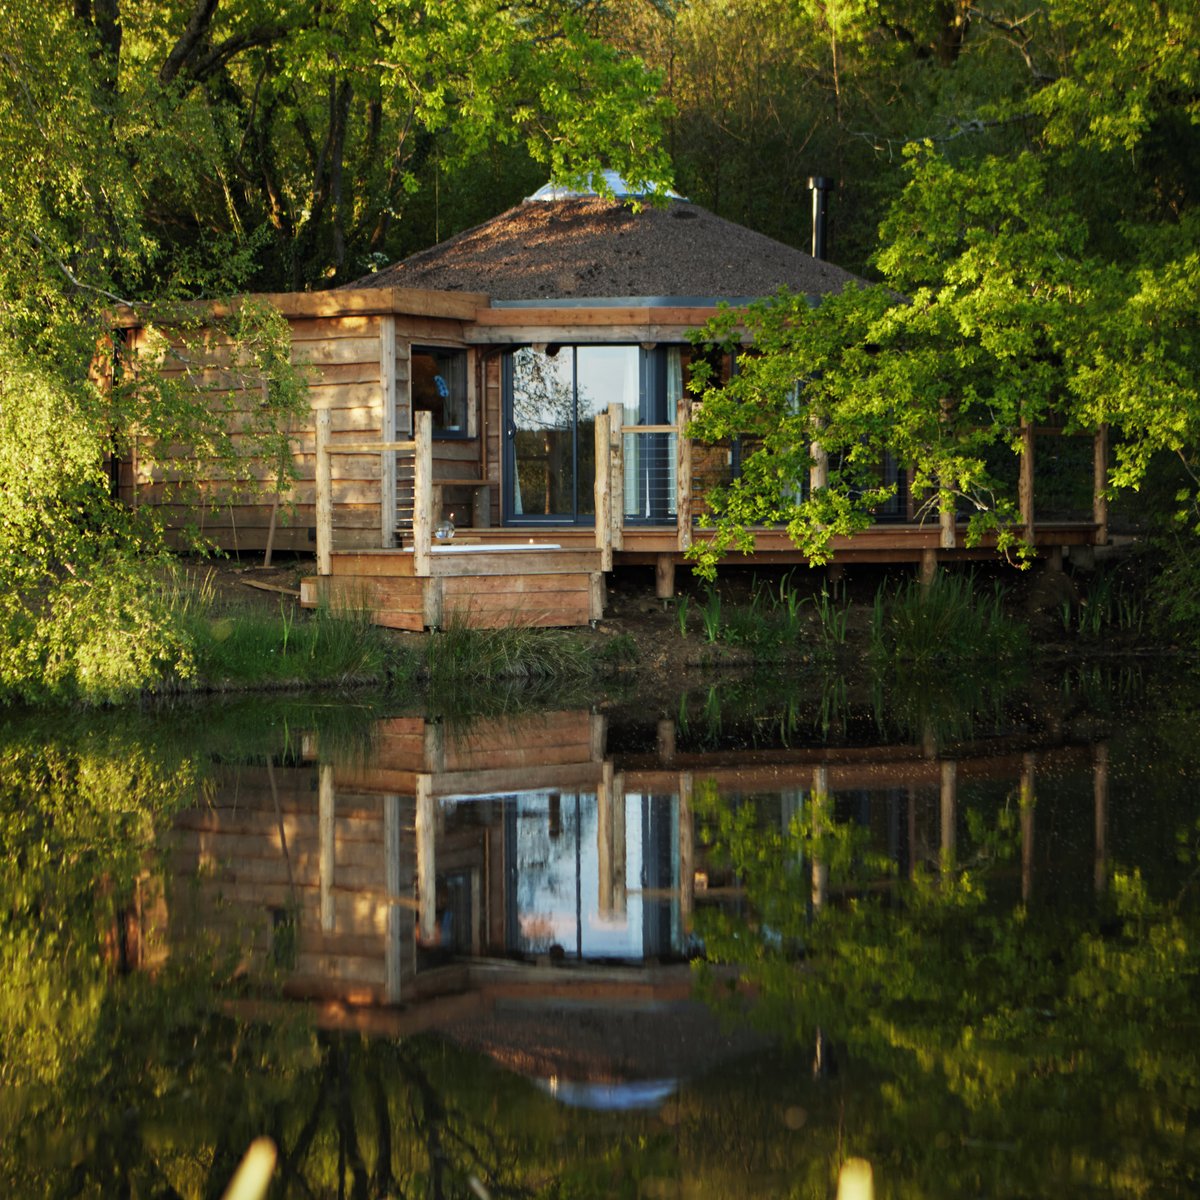 There's no better time to enjoy the great outdoors! For time away from the daily grind, take a leaf from Joanna Gregory's book and check into At the Pond, a beautiful cabin in Brewham, Somerset: thebespokeblackbook.com/a-charming-ret… #bespokeblackbook #cabinlife #somerset